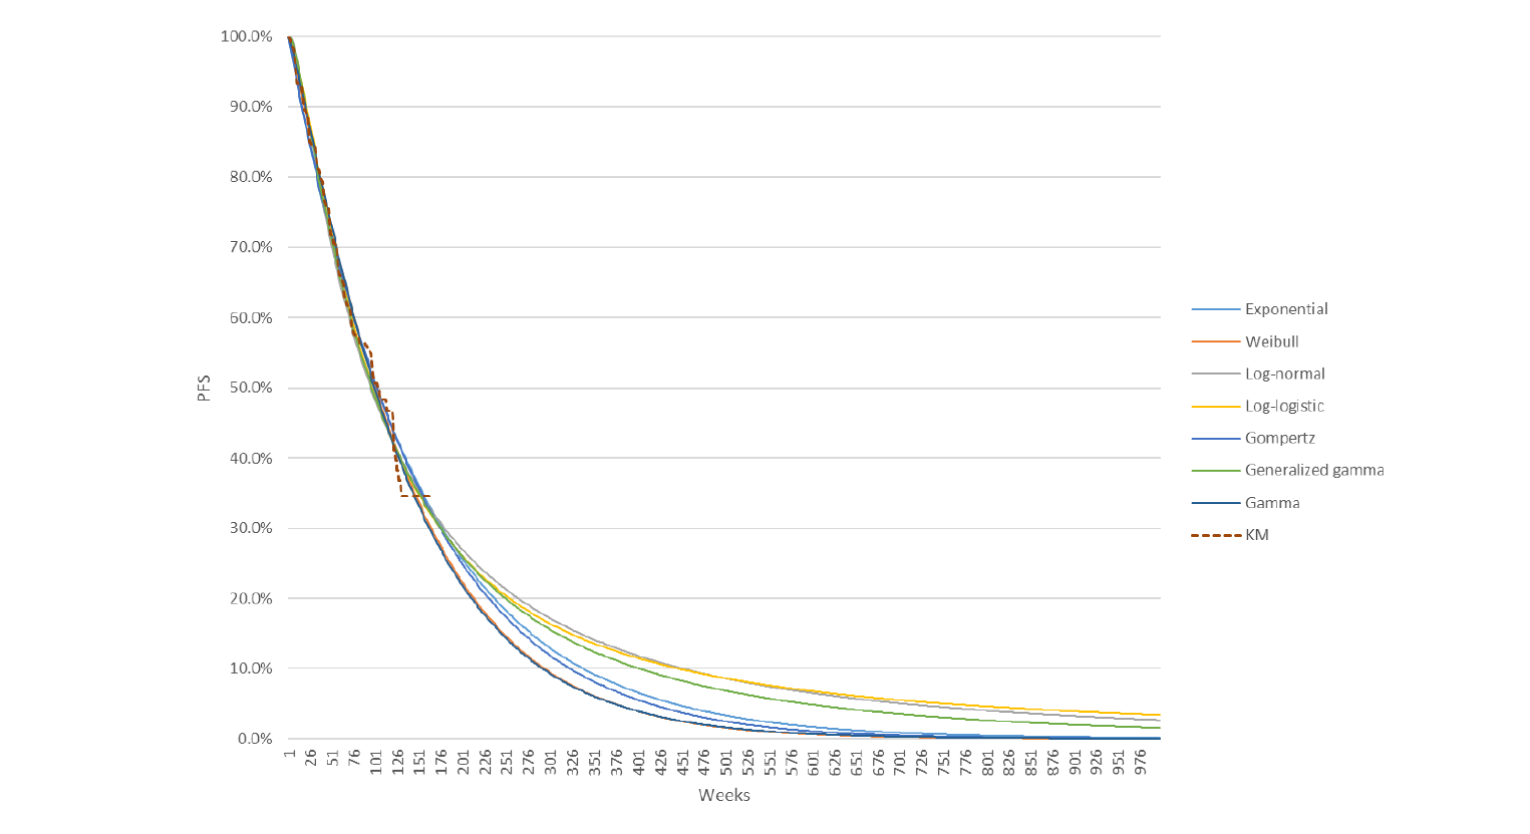 A Kaplan-Meier survival curve with “progression-free survival” on the y-axis and “weeks” on the x-axis. The observed survival data are displayed as a dashed line, with overlaid solid lines describing parametric approximations (exponential, Weibull, Log-normal, Log-logistic, Gompertz, generalized gamma, and gamma) of long-term PFS. The parametric functions are relatively similar to one another in terms of long-term predicted PFS.